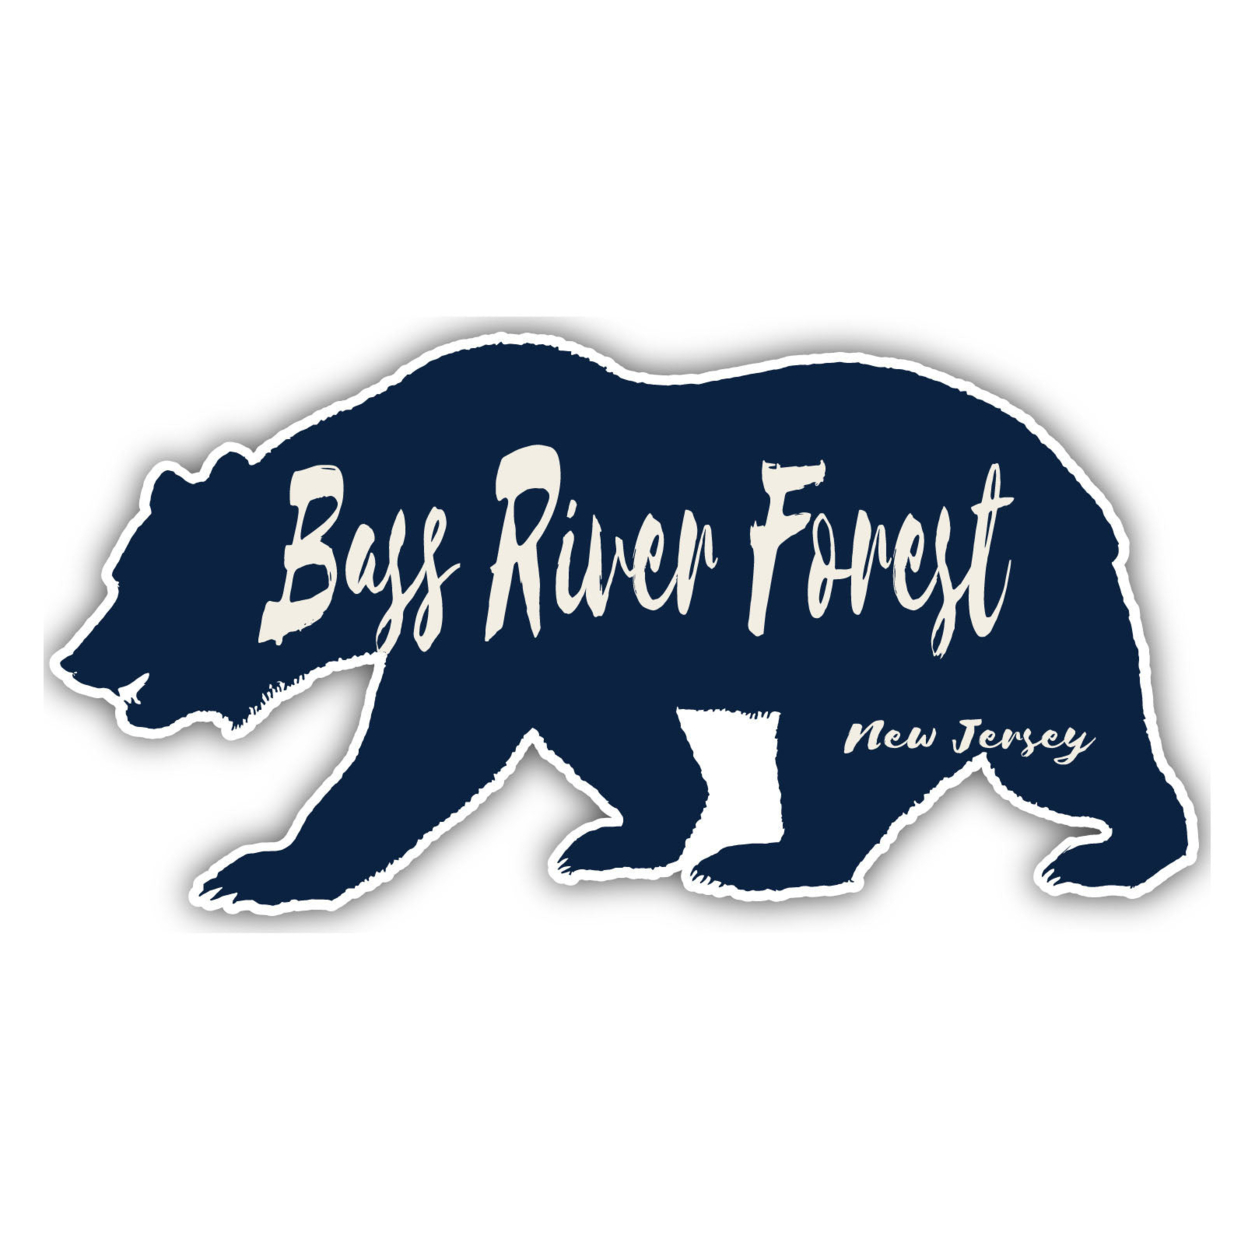 Bass River Forest New Jersey Souvenir Decorative Stickers (Choose Theme And Size) - 4-Pack, 6-Inch, Bear